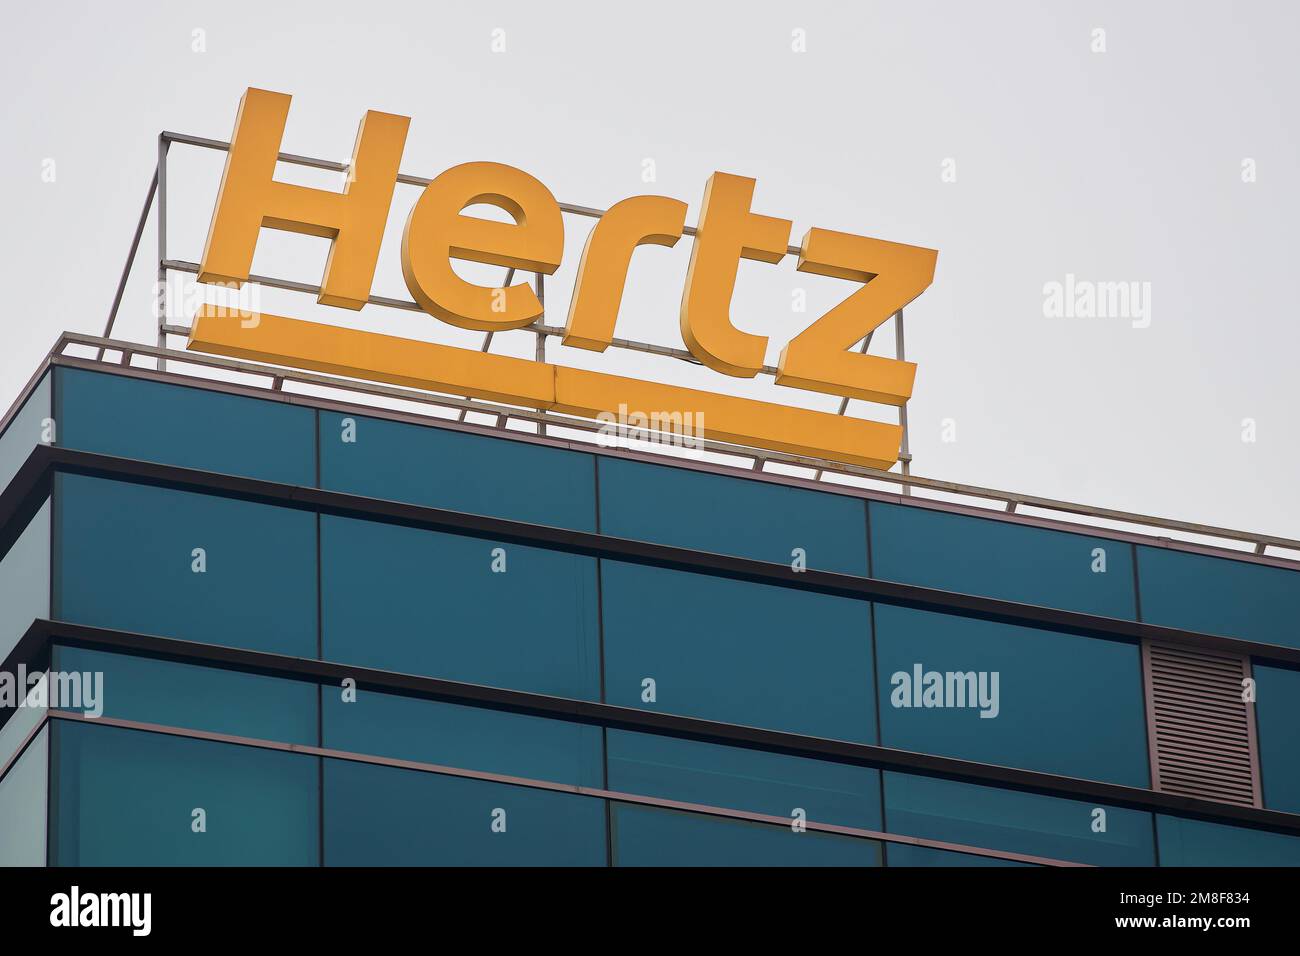 Bucharest, Romania - January 13, 2023: The logo of the American car rental company Hertz can be seen on a building. This image is for editorial use on Stock Photo